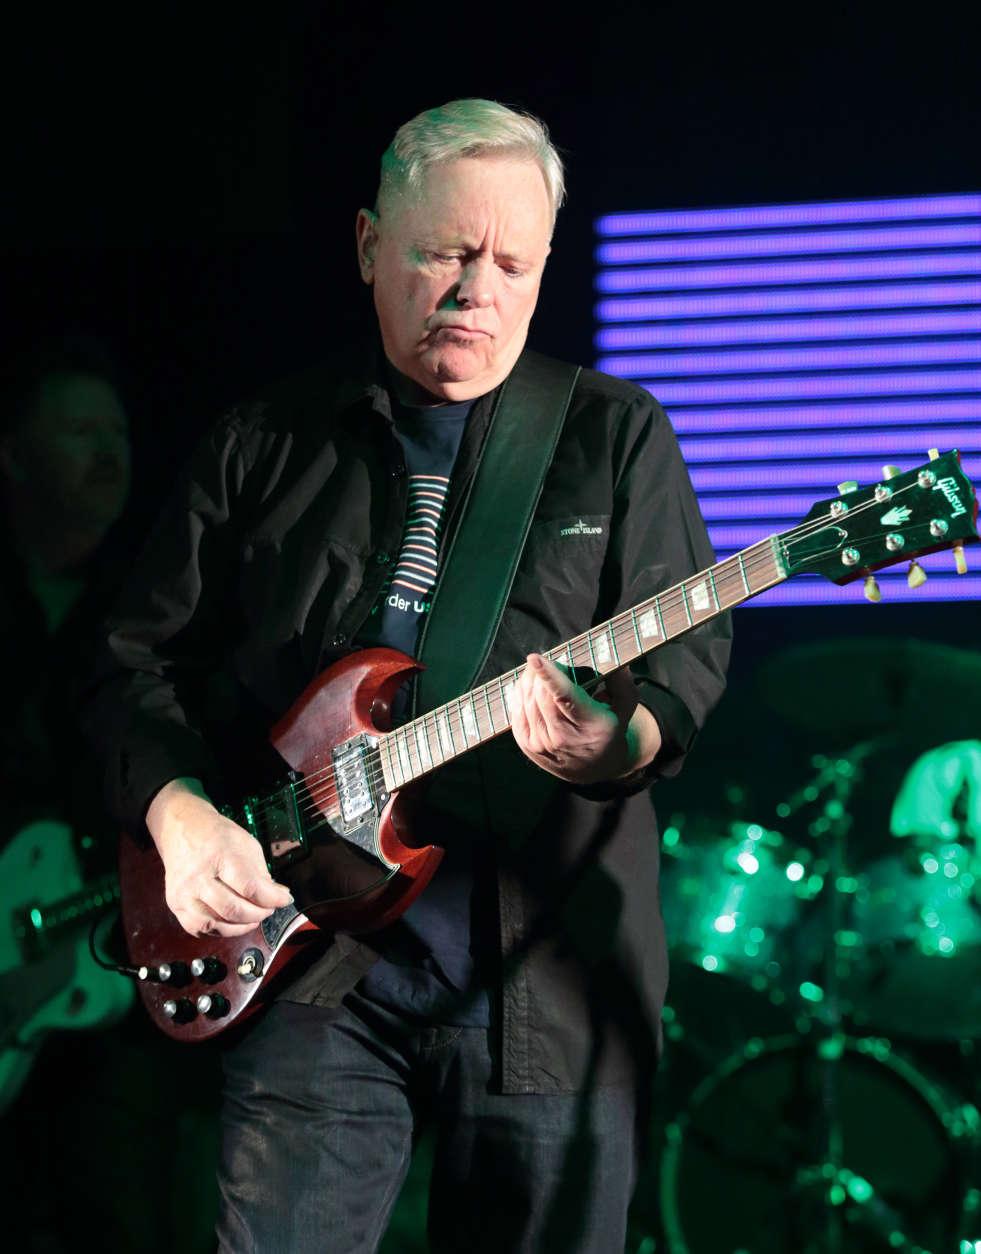 Bernard Sumner of the band New Order performs in concert during their Music Complete Tour 2016 at the Tower Theater on Saturday, March 12, 2016, in Upper Darby, Pa. (Photo by Owen Sweeney/Invision/AP)